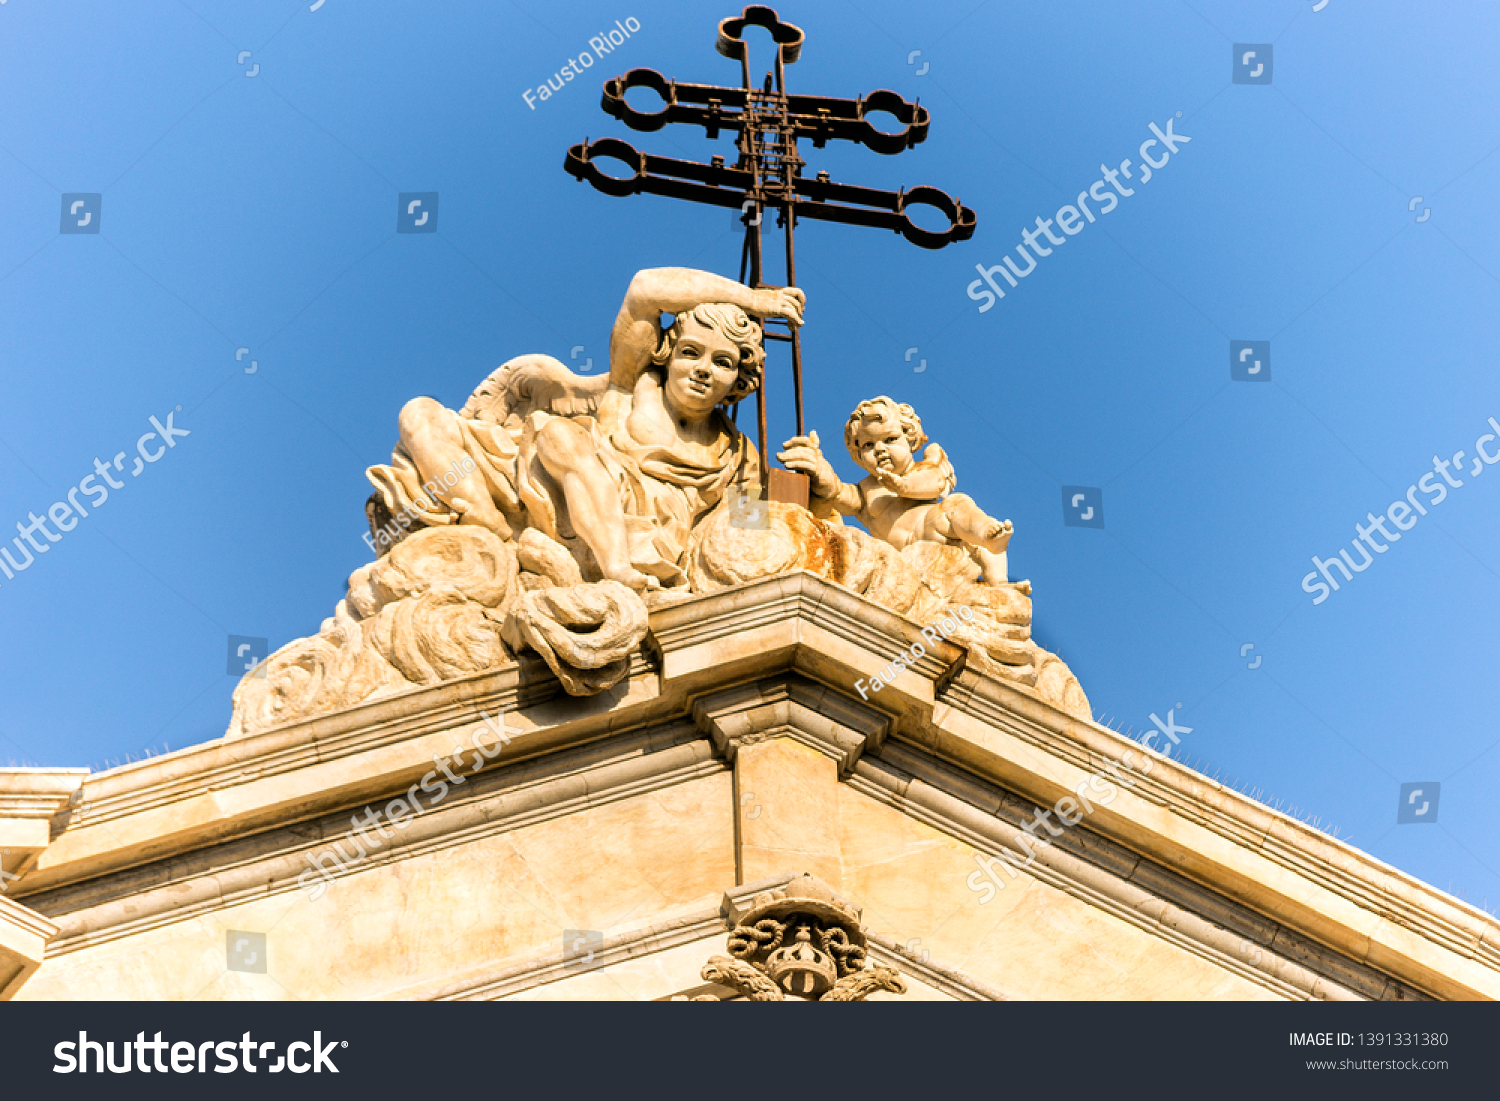 Sculptures of Metropolitan Cathedral of Saint Agatha in Catania, Sicily, Italy. #1391331380